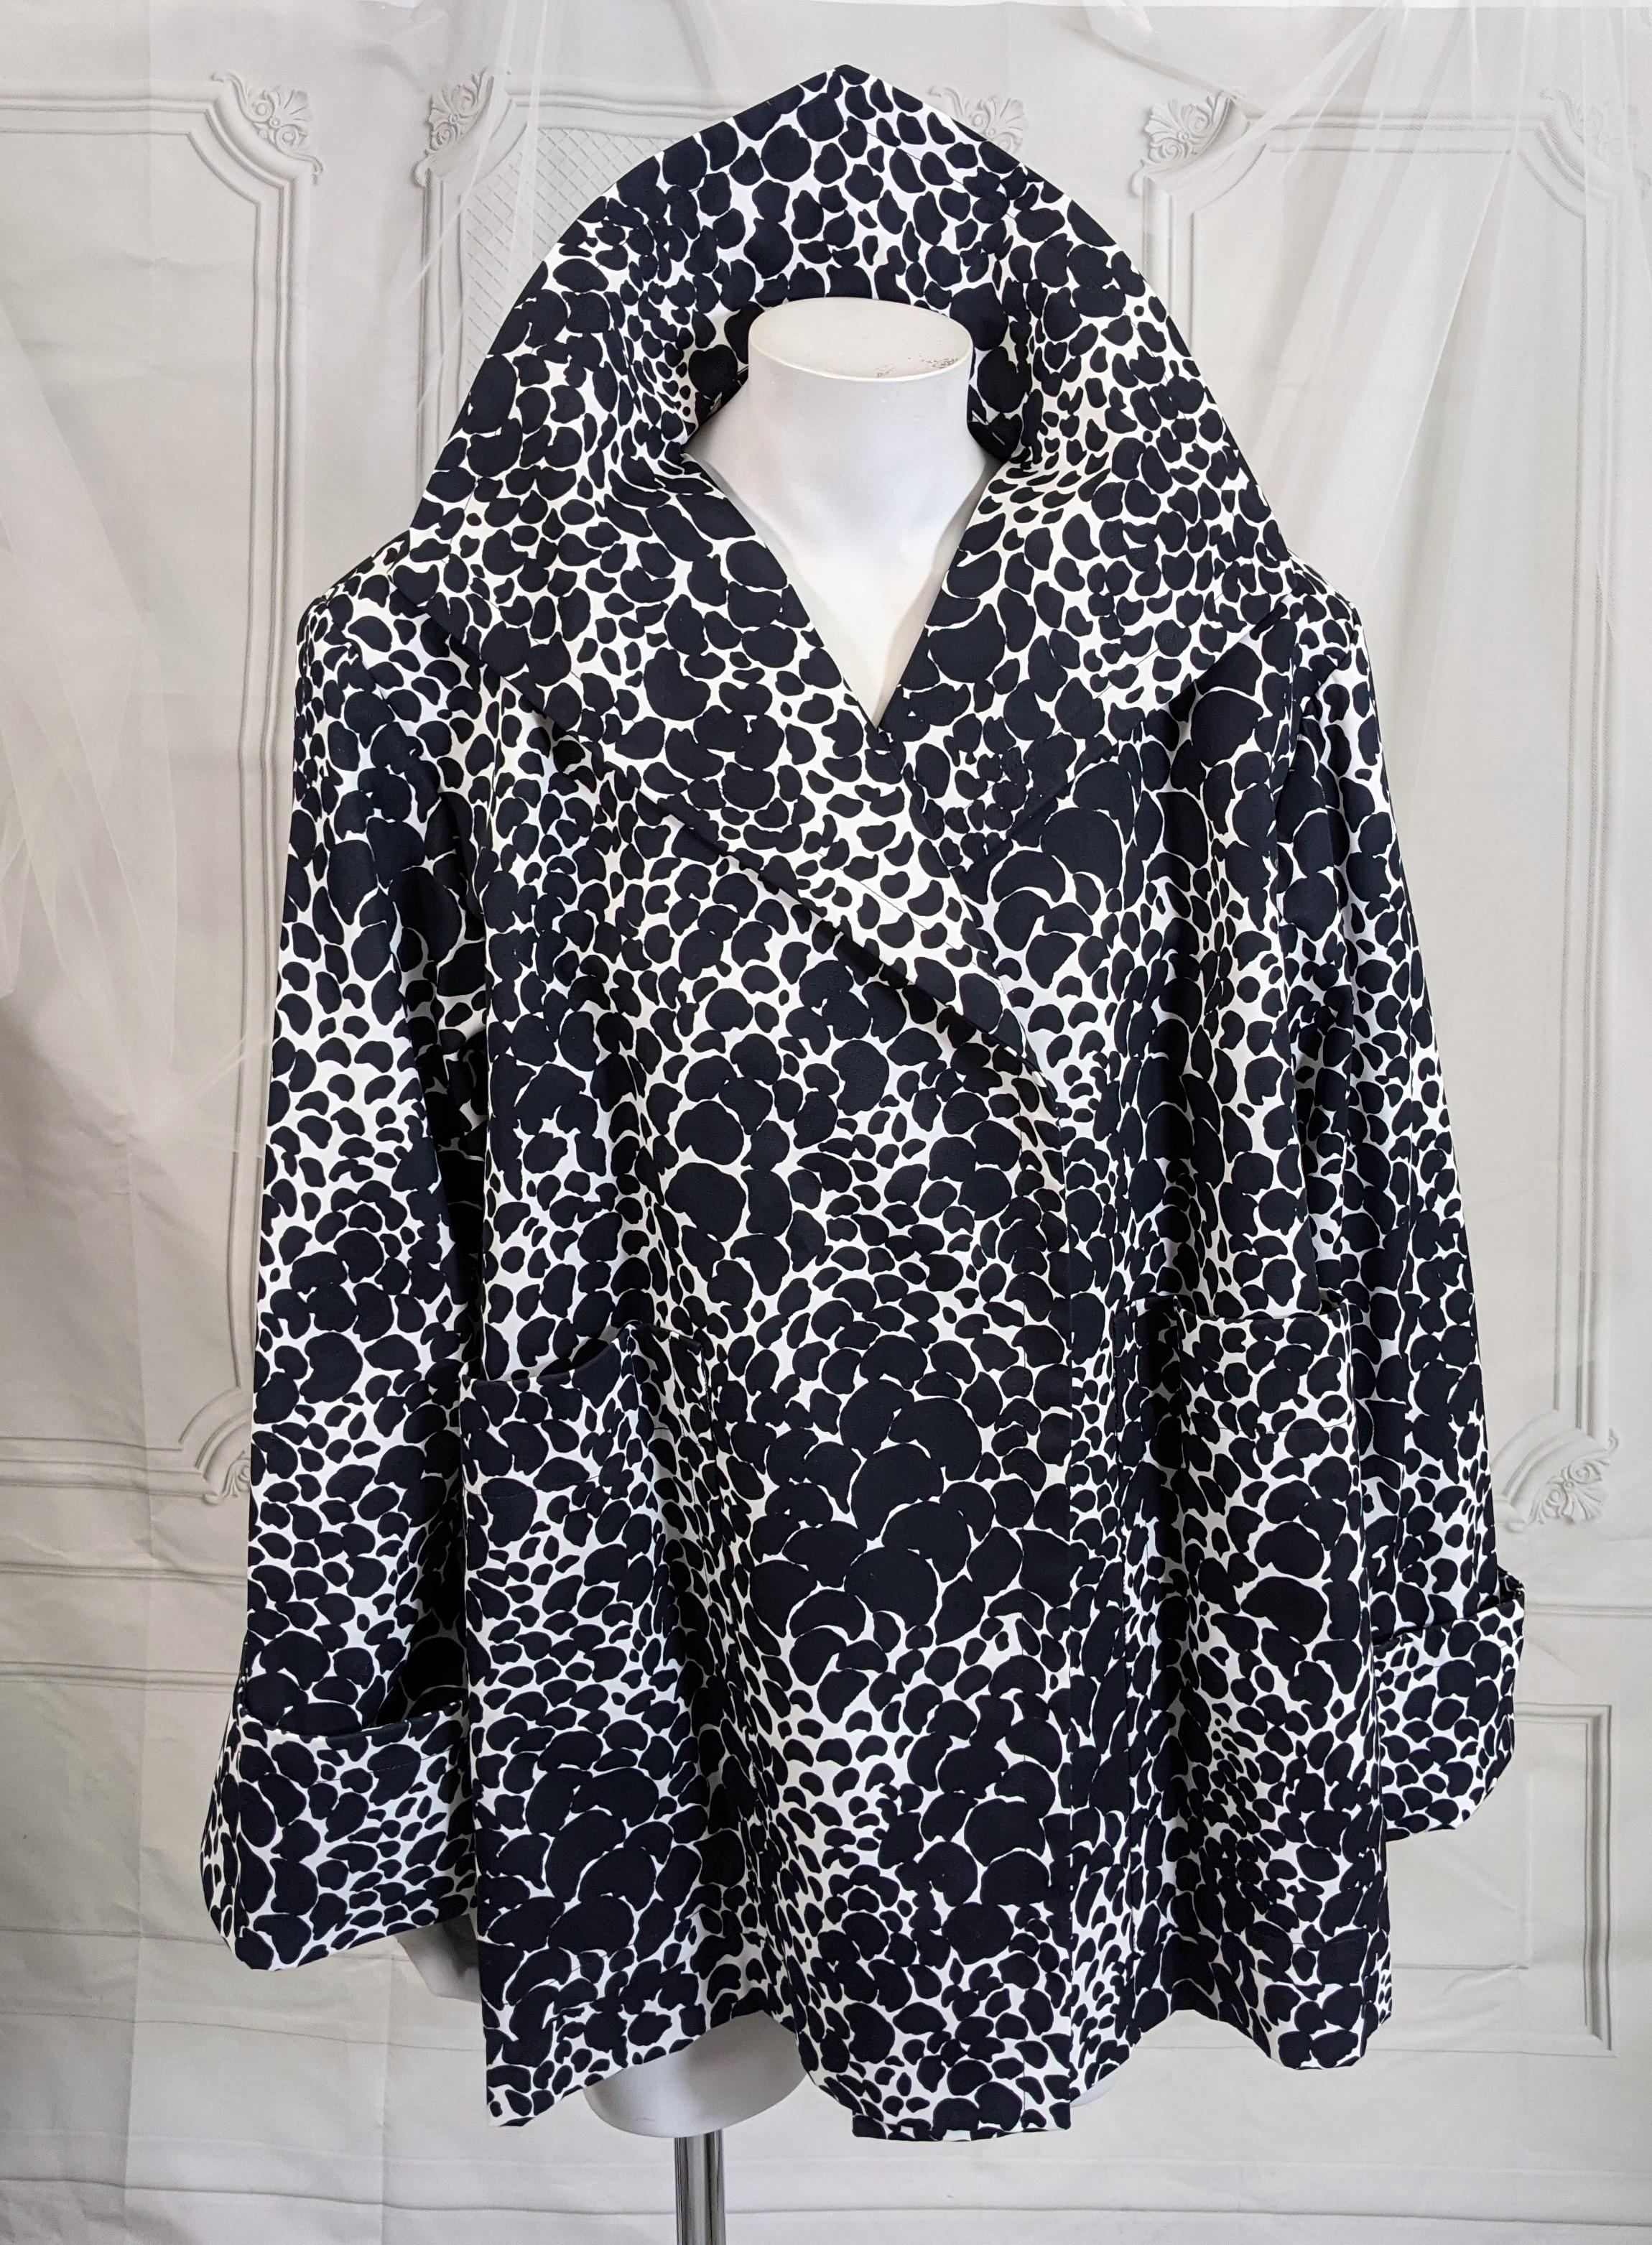 Yves Saint Laurent Cotton Sateen Jacket in black/white floral abstract print suitable for day or evening. Fully cut versatile Swing coat style with important shoulders, large patch pockets, and cuffed wide sleeves, perfect with a simple black sheath